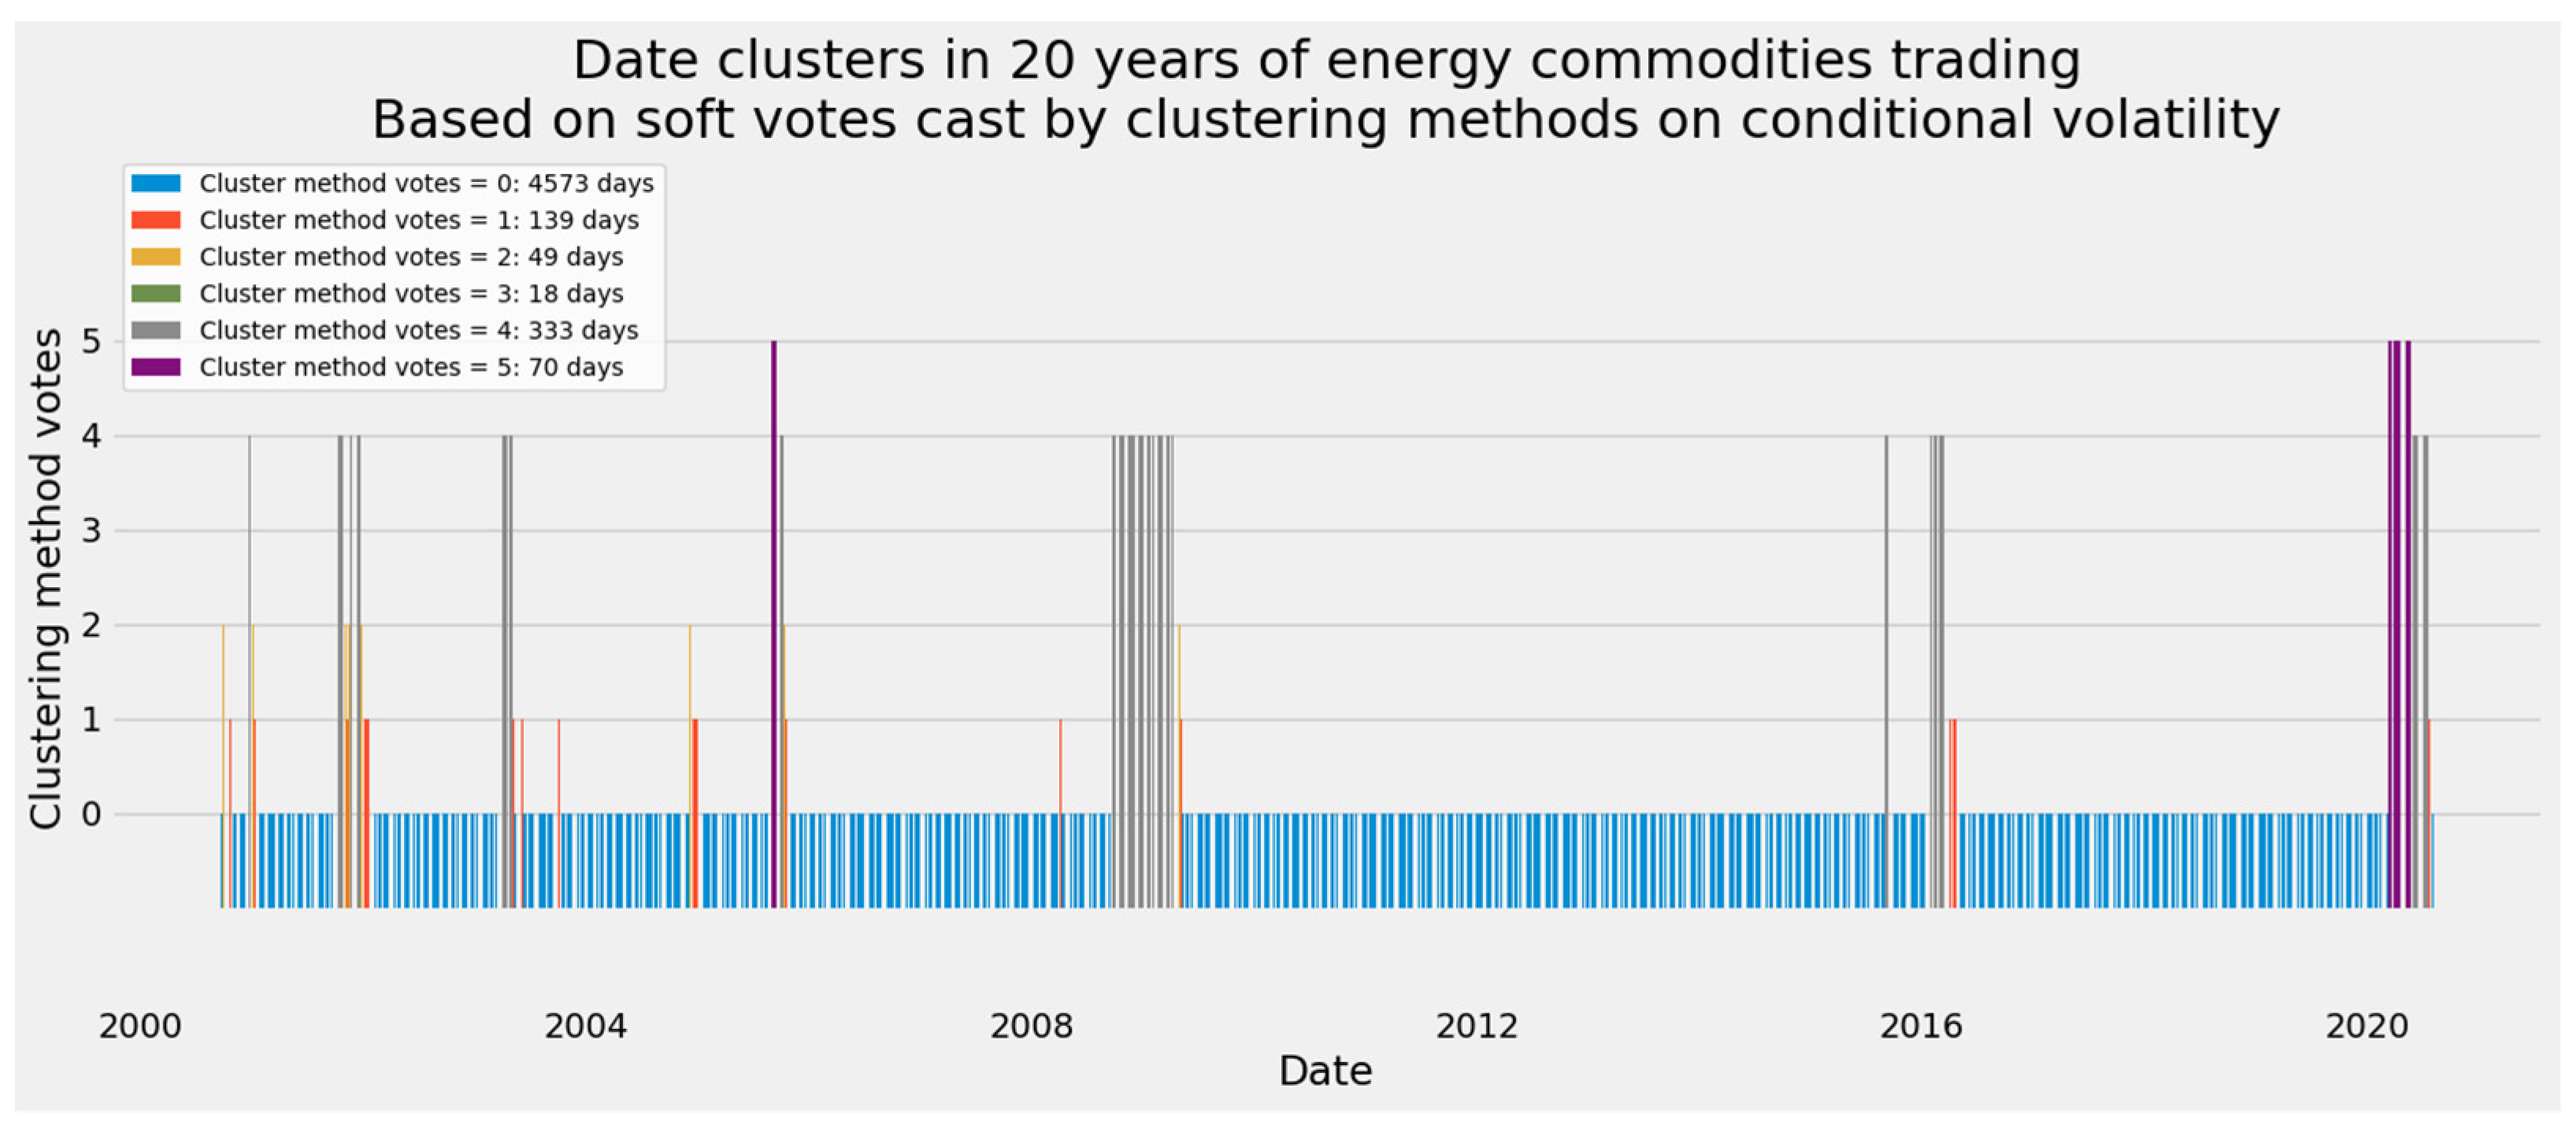 Energies | Free Full-Text | A Pattern New in Every Moment: The Temporal  Clustering of Markets for Crude Oil, Refined Fuels, and Other Commodities |  HTML